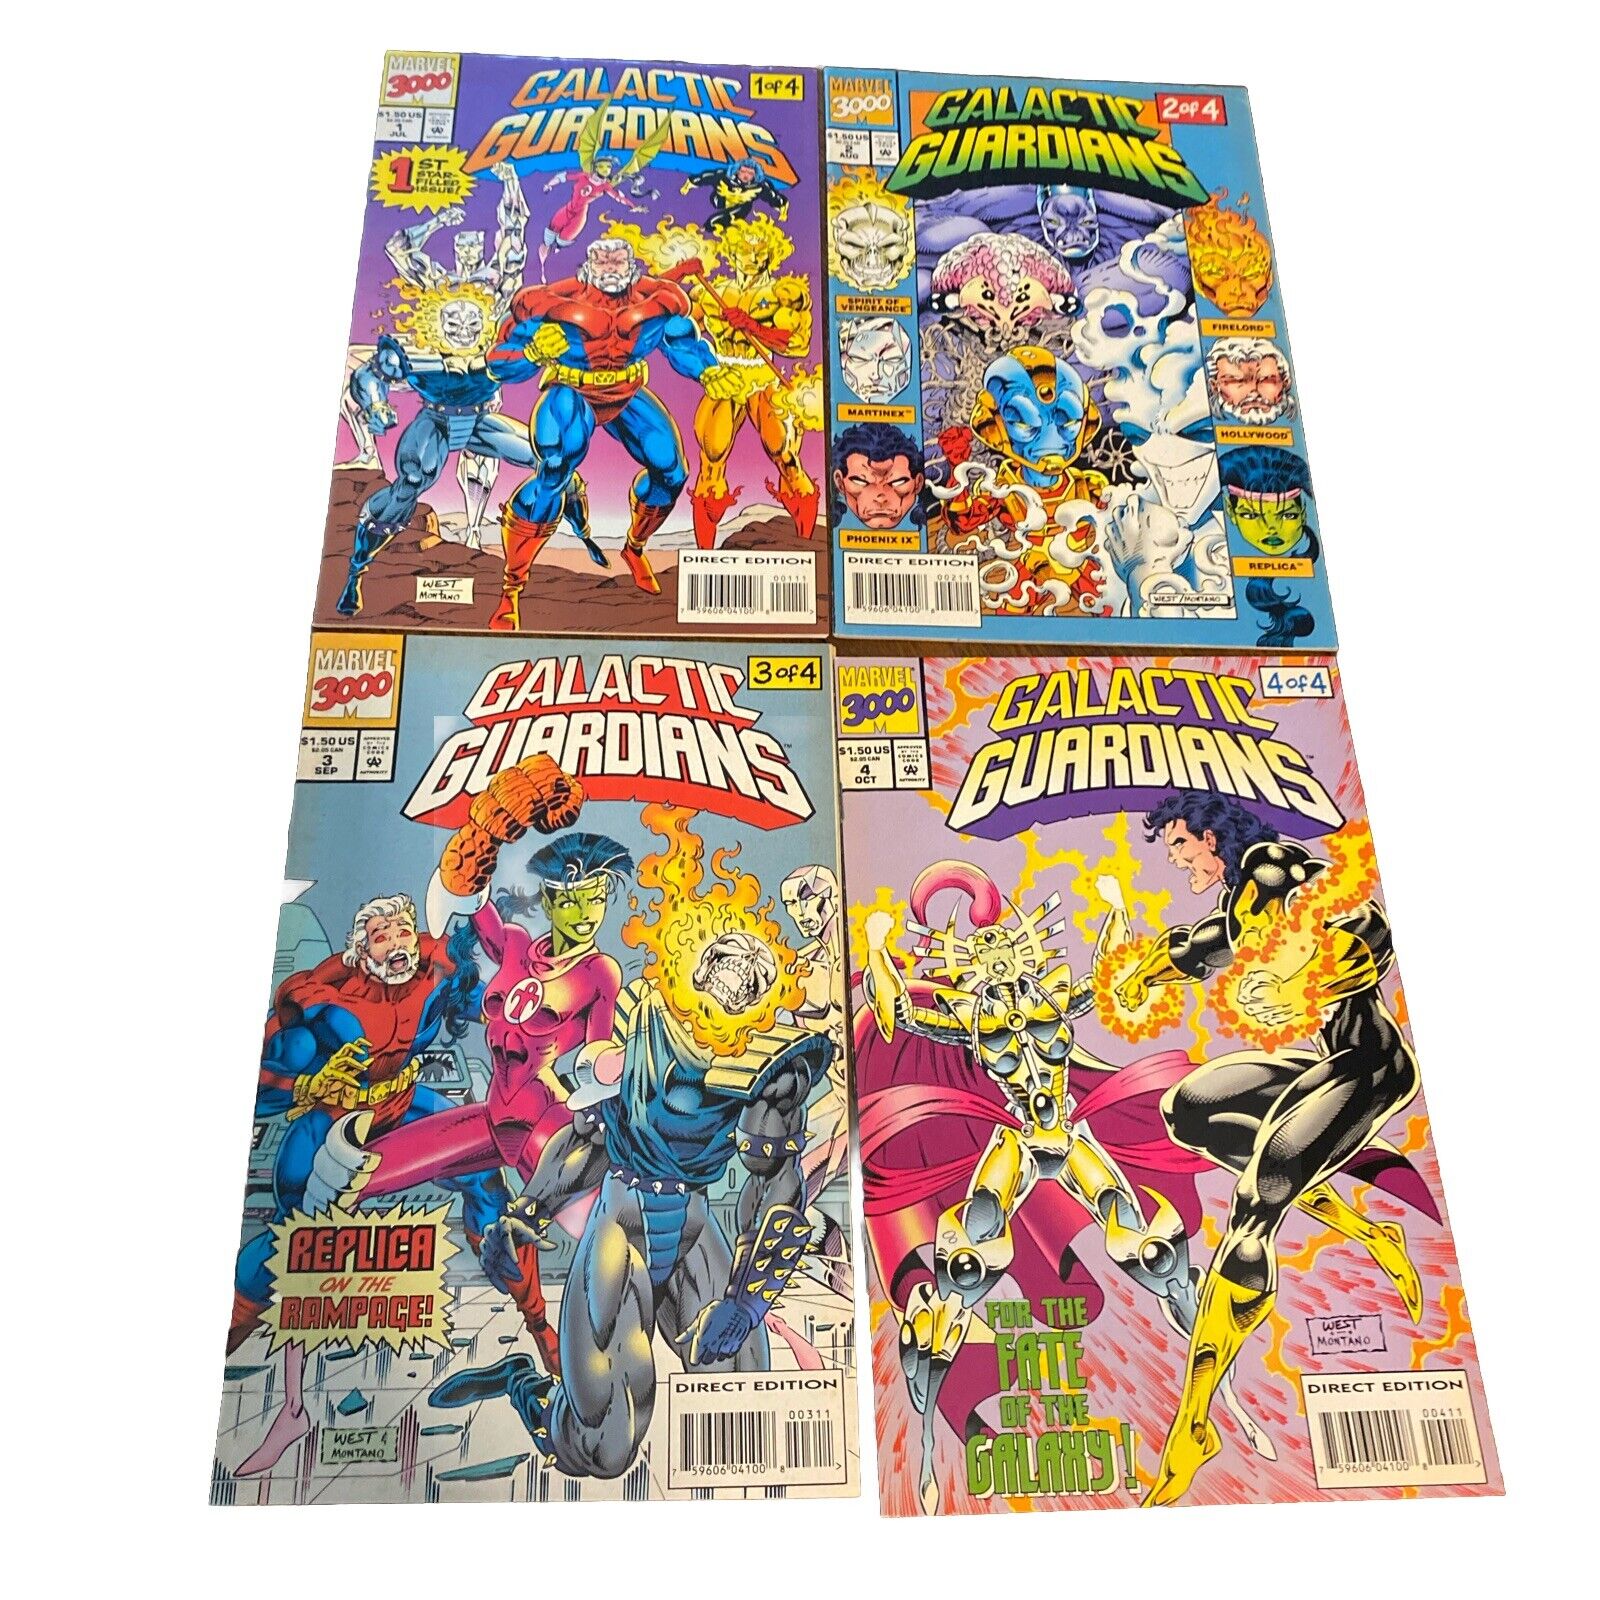 Galactic Guardians (1994) #1-4, Complete Four Issue Series, F-VF